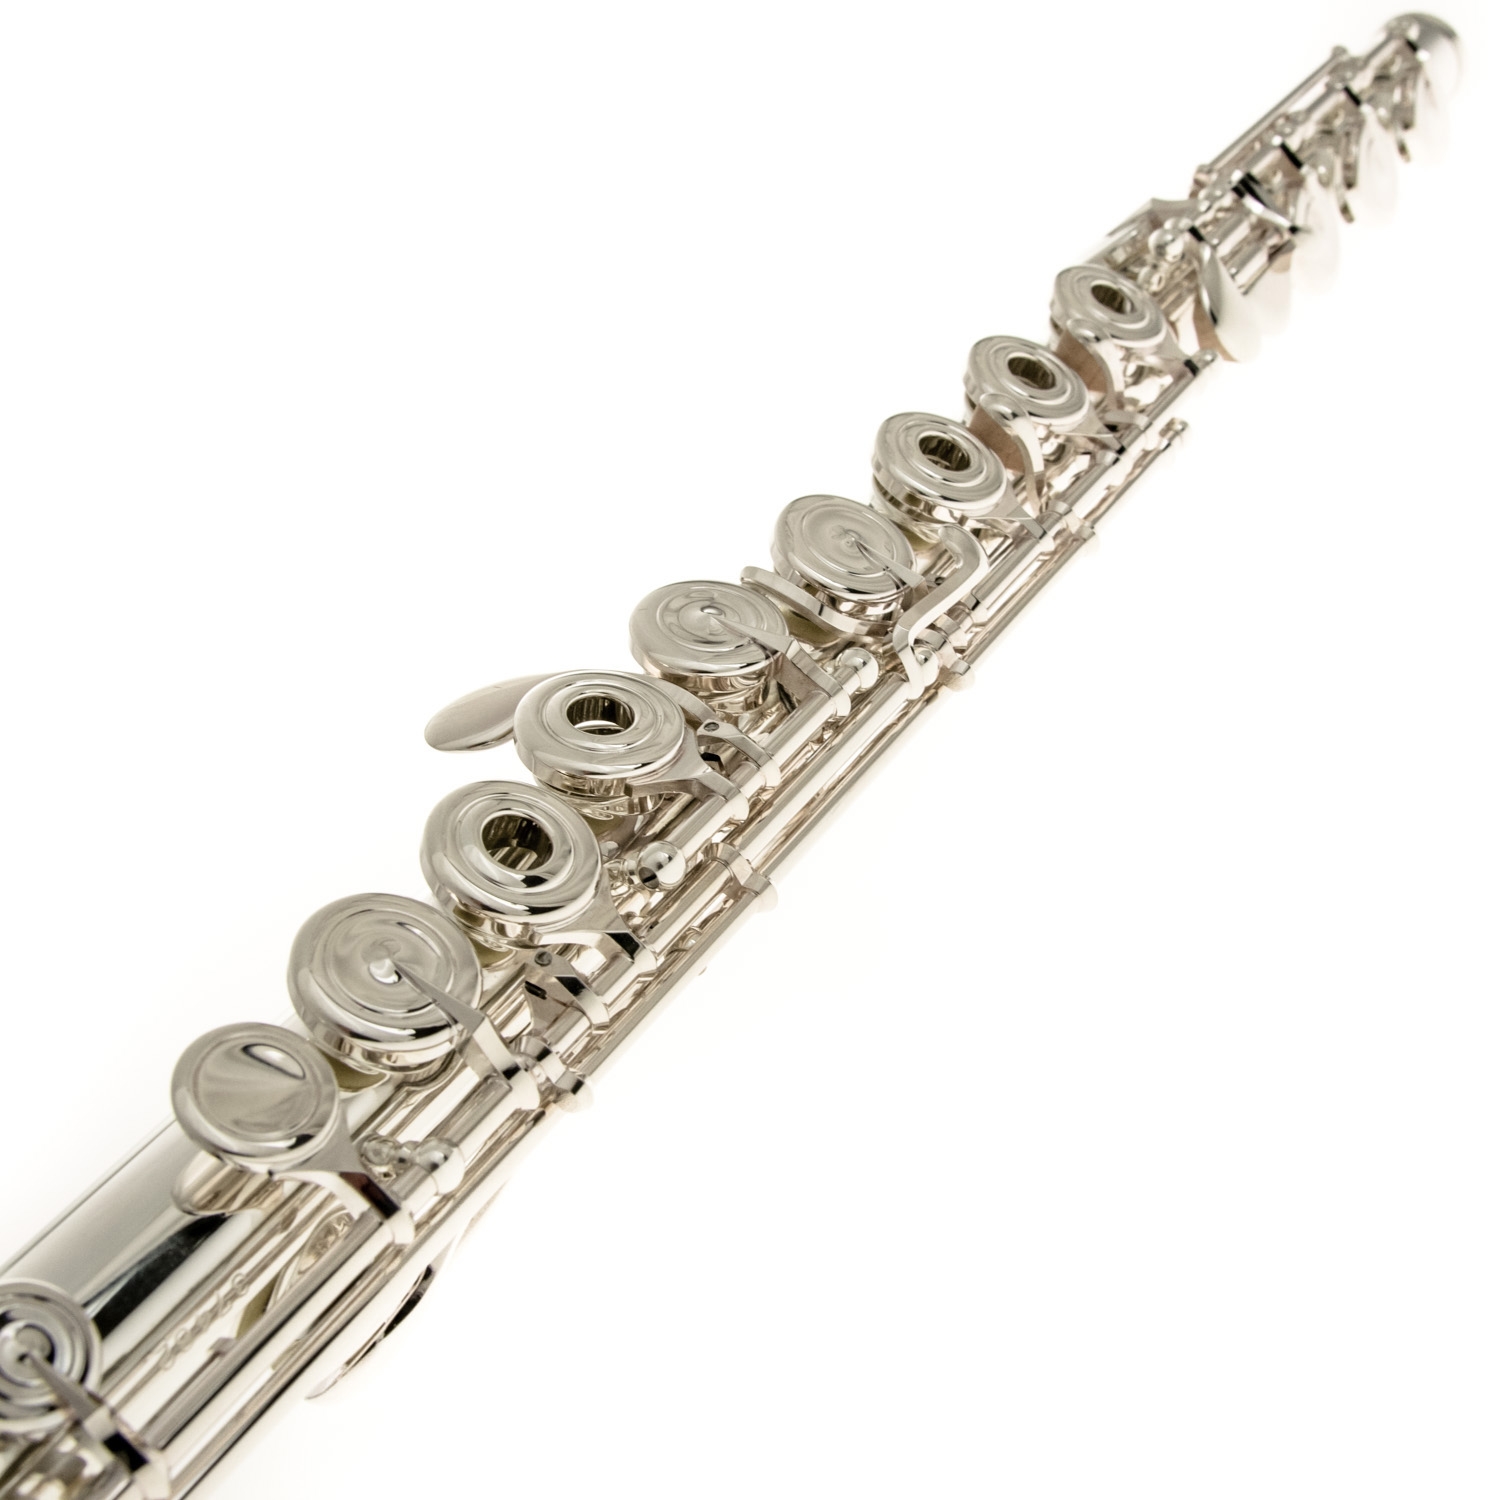 Pearl CD-958 RBE Cantabile Querflöte mit 14K Gold Kamin